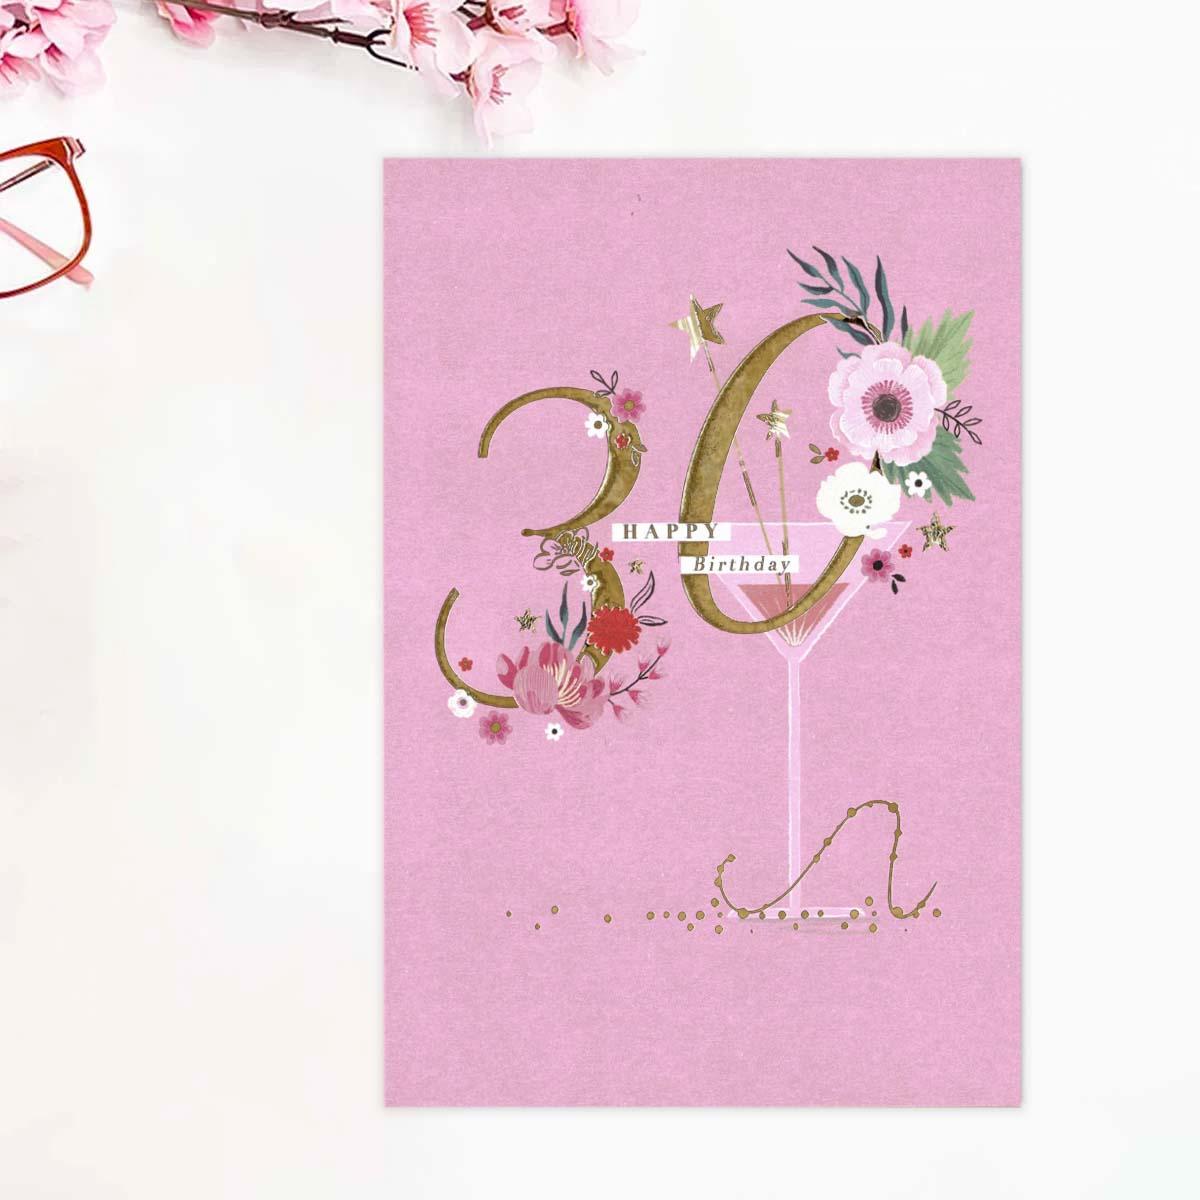 Happy Birthday 30 Pink Card Front Image